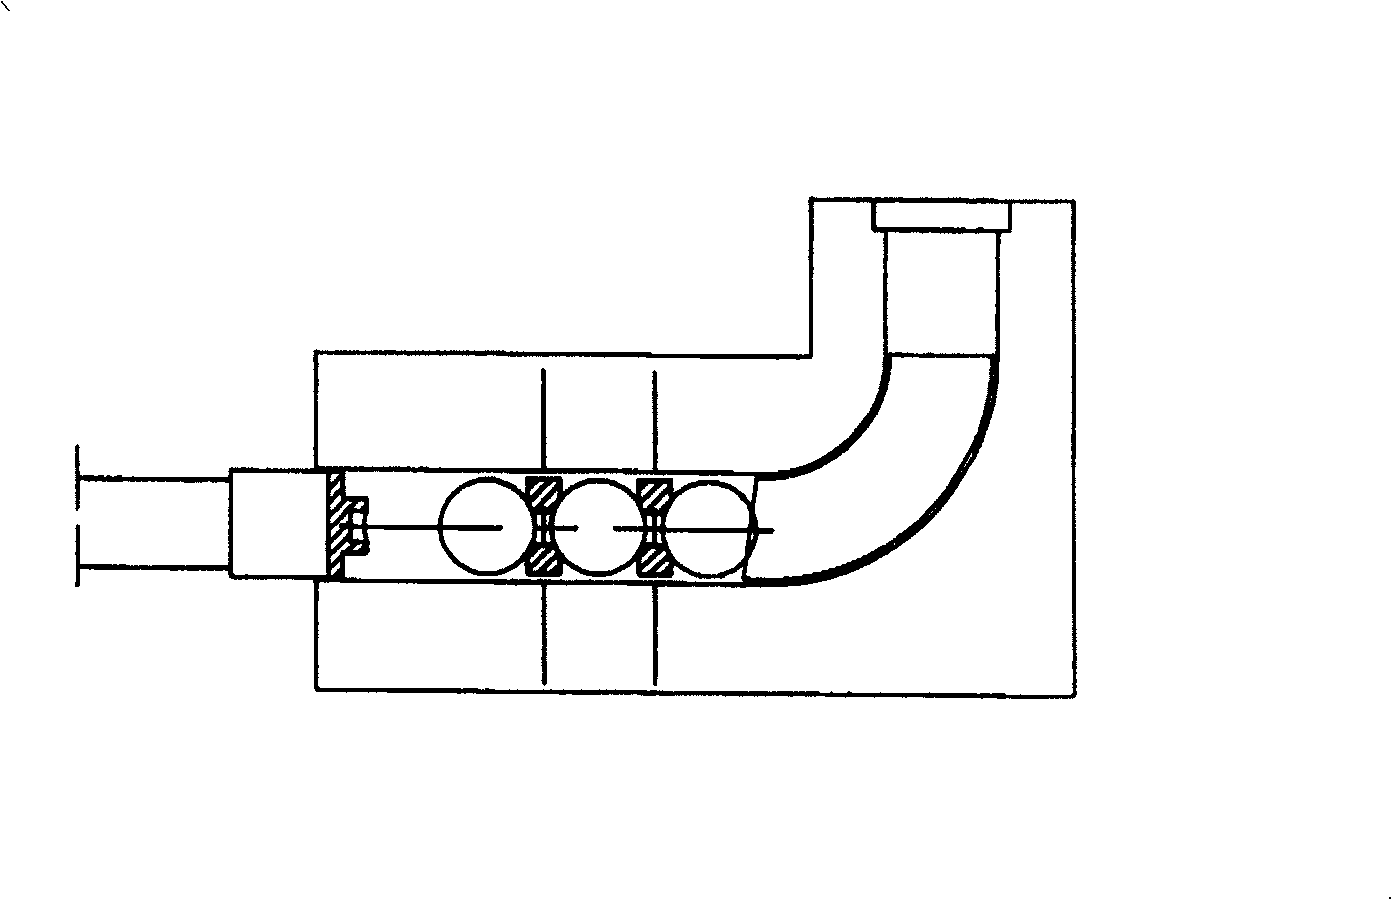 Method for forming pipe fittings by cold extrusion